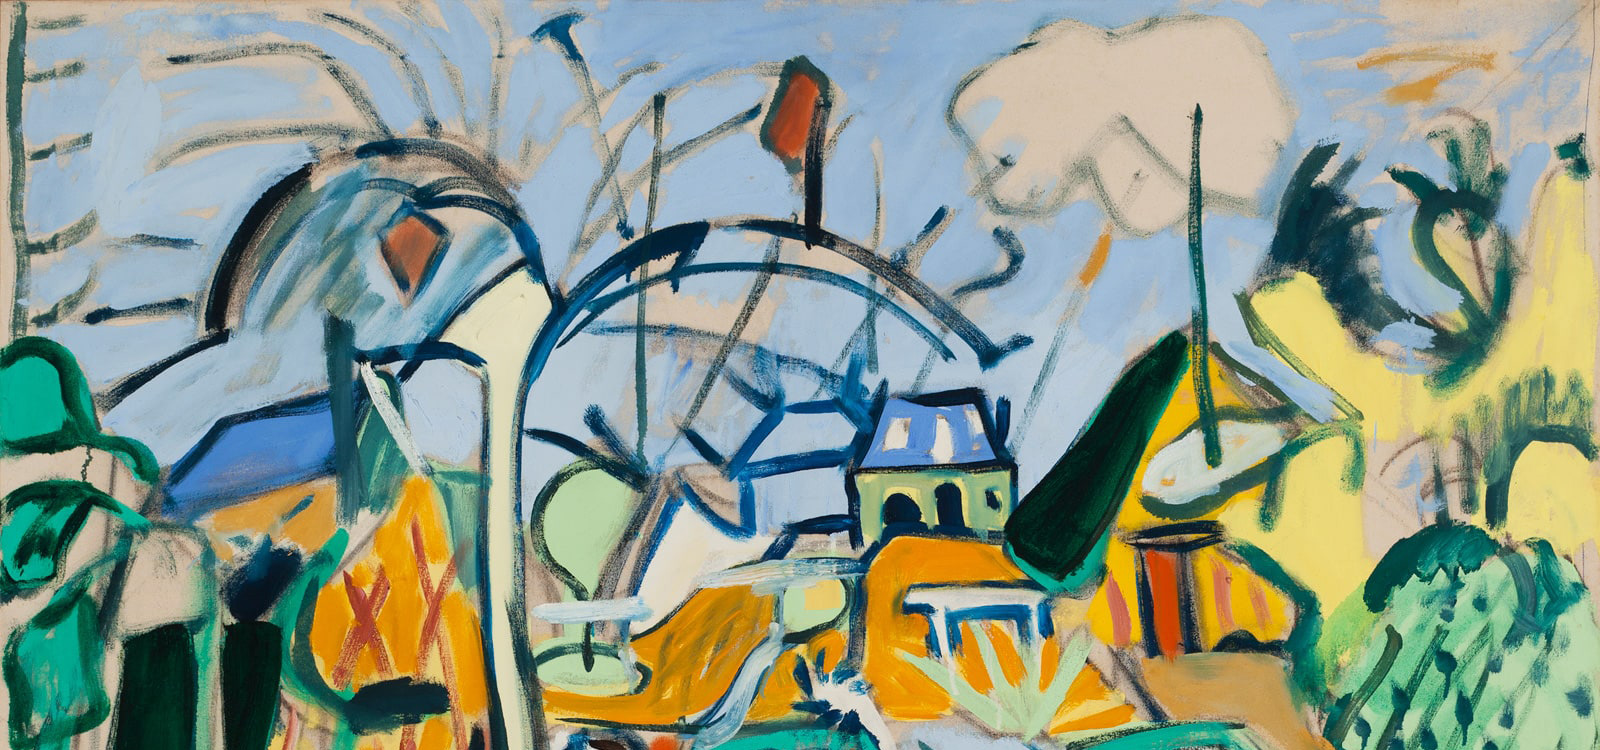 Abstract painting of a landscape with blue sky, orange land, simplistic buildings in bright colors, yellow mountains on the far right, and hairy trees in the foreground.